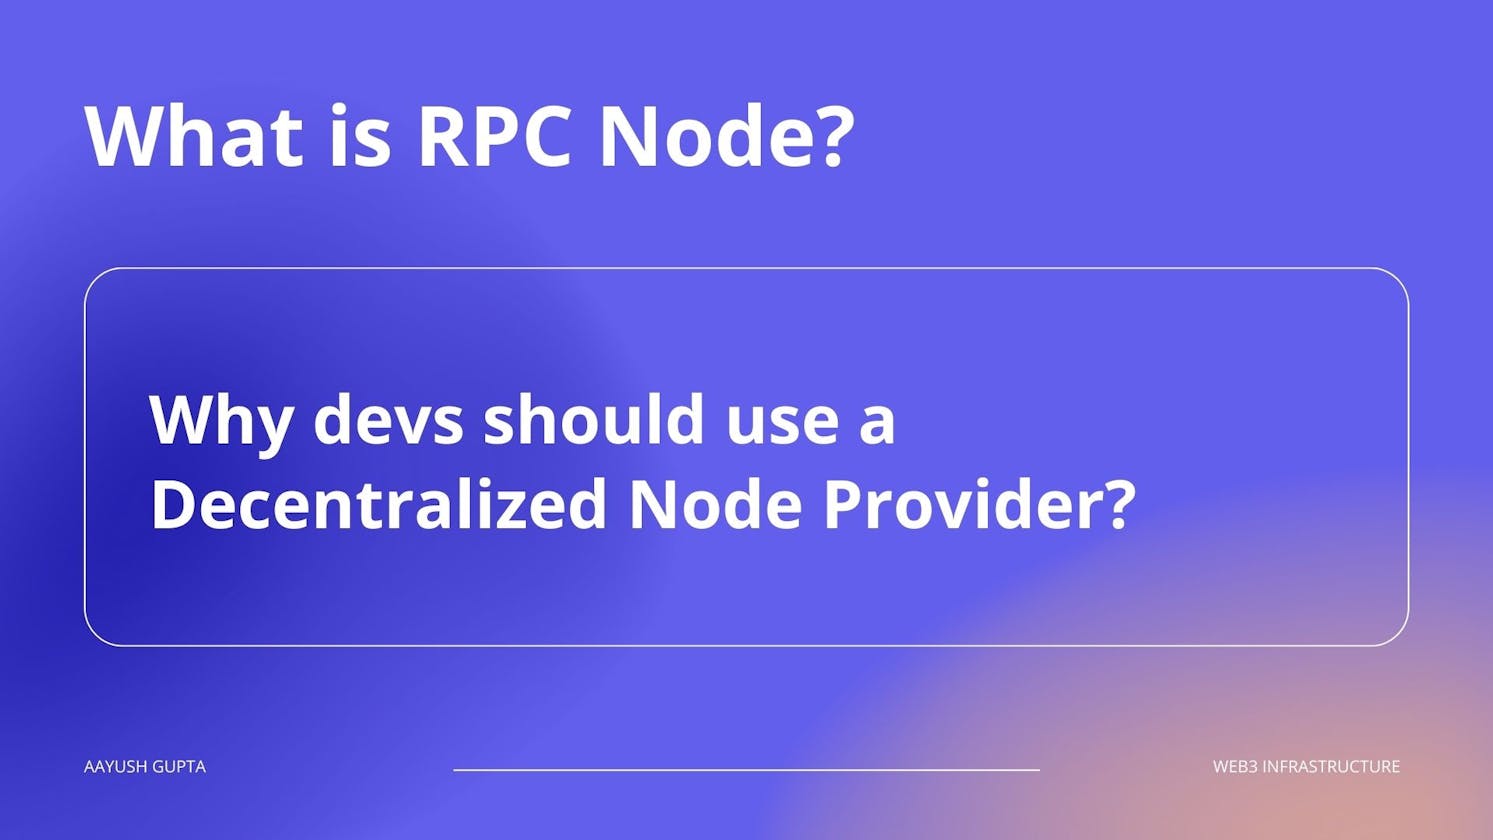 What is RPC Node? Why Devs should use Decentralized Node Providers?